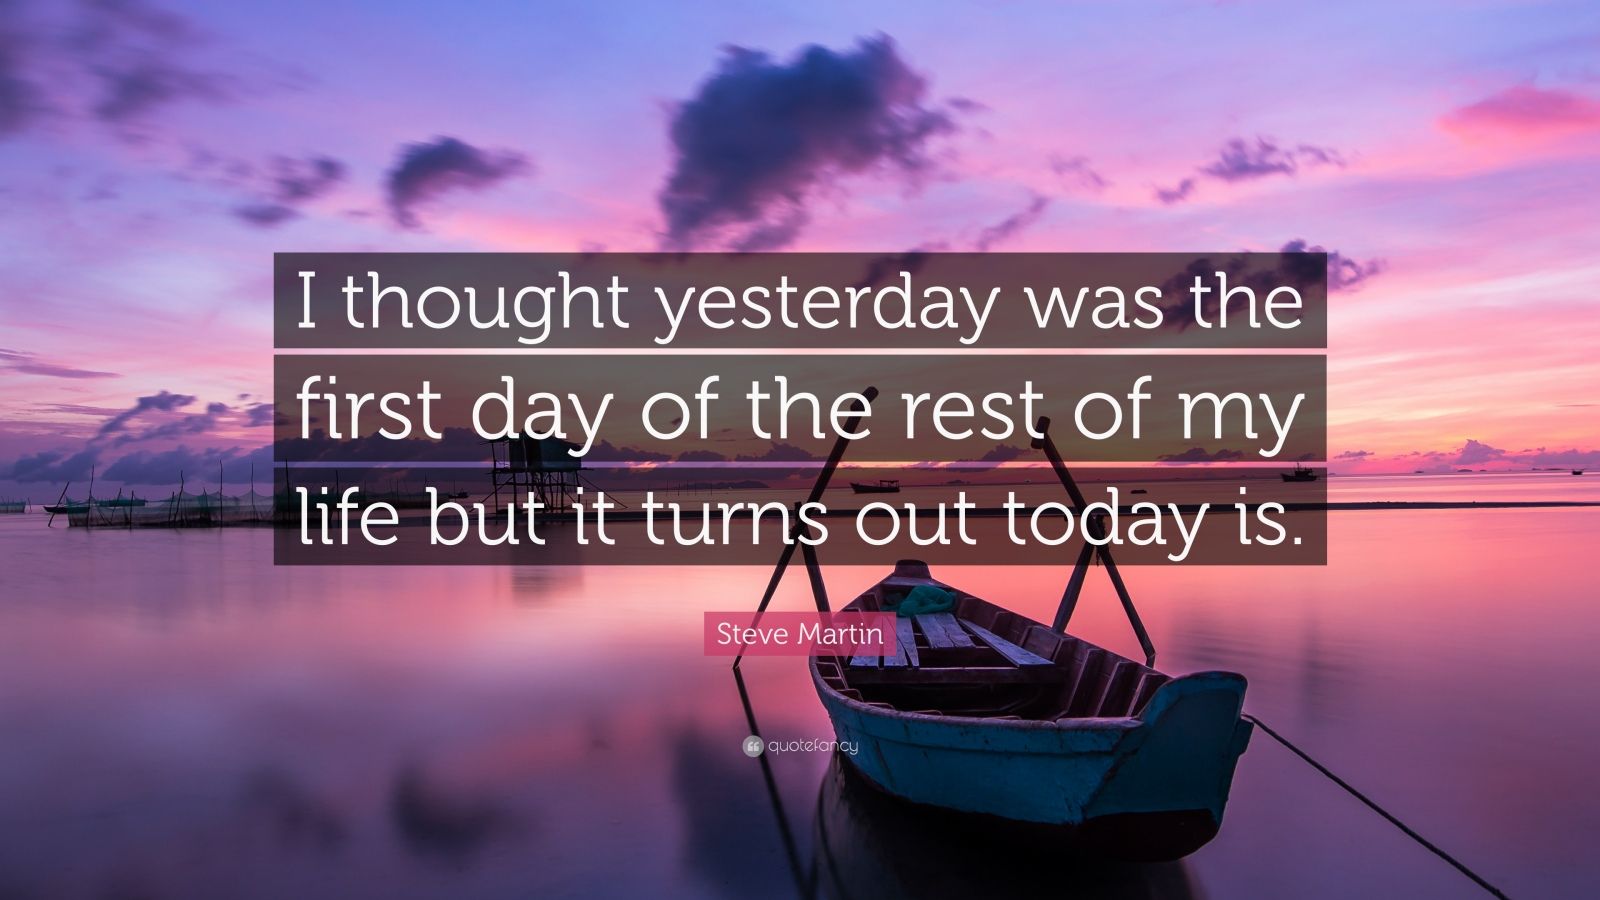 Steve Martin Quote: "I thought yesterday was the first day ...